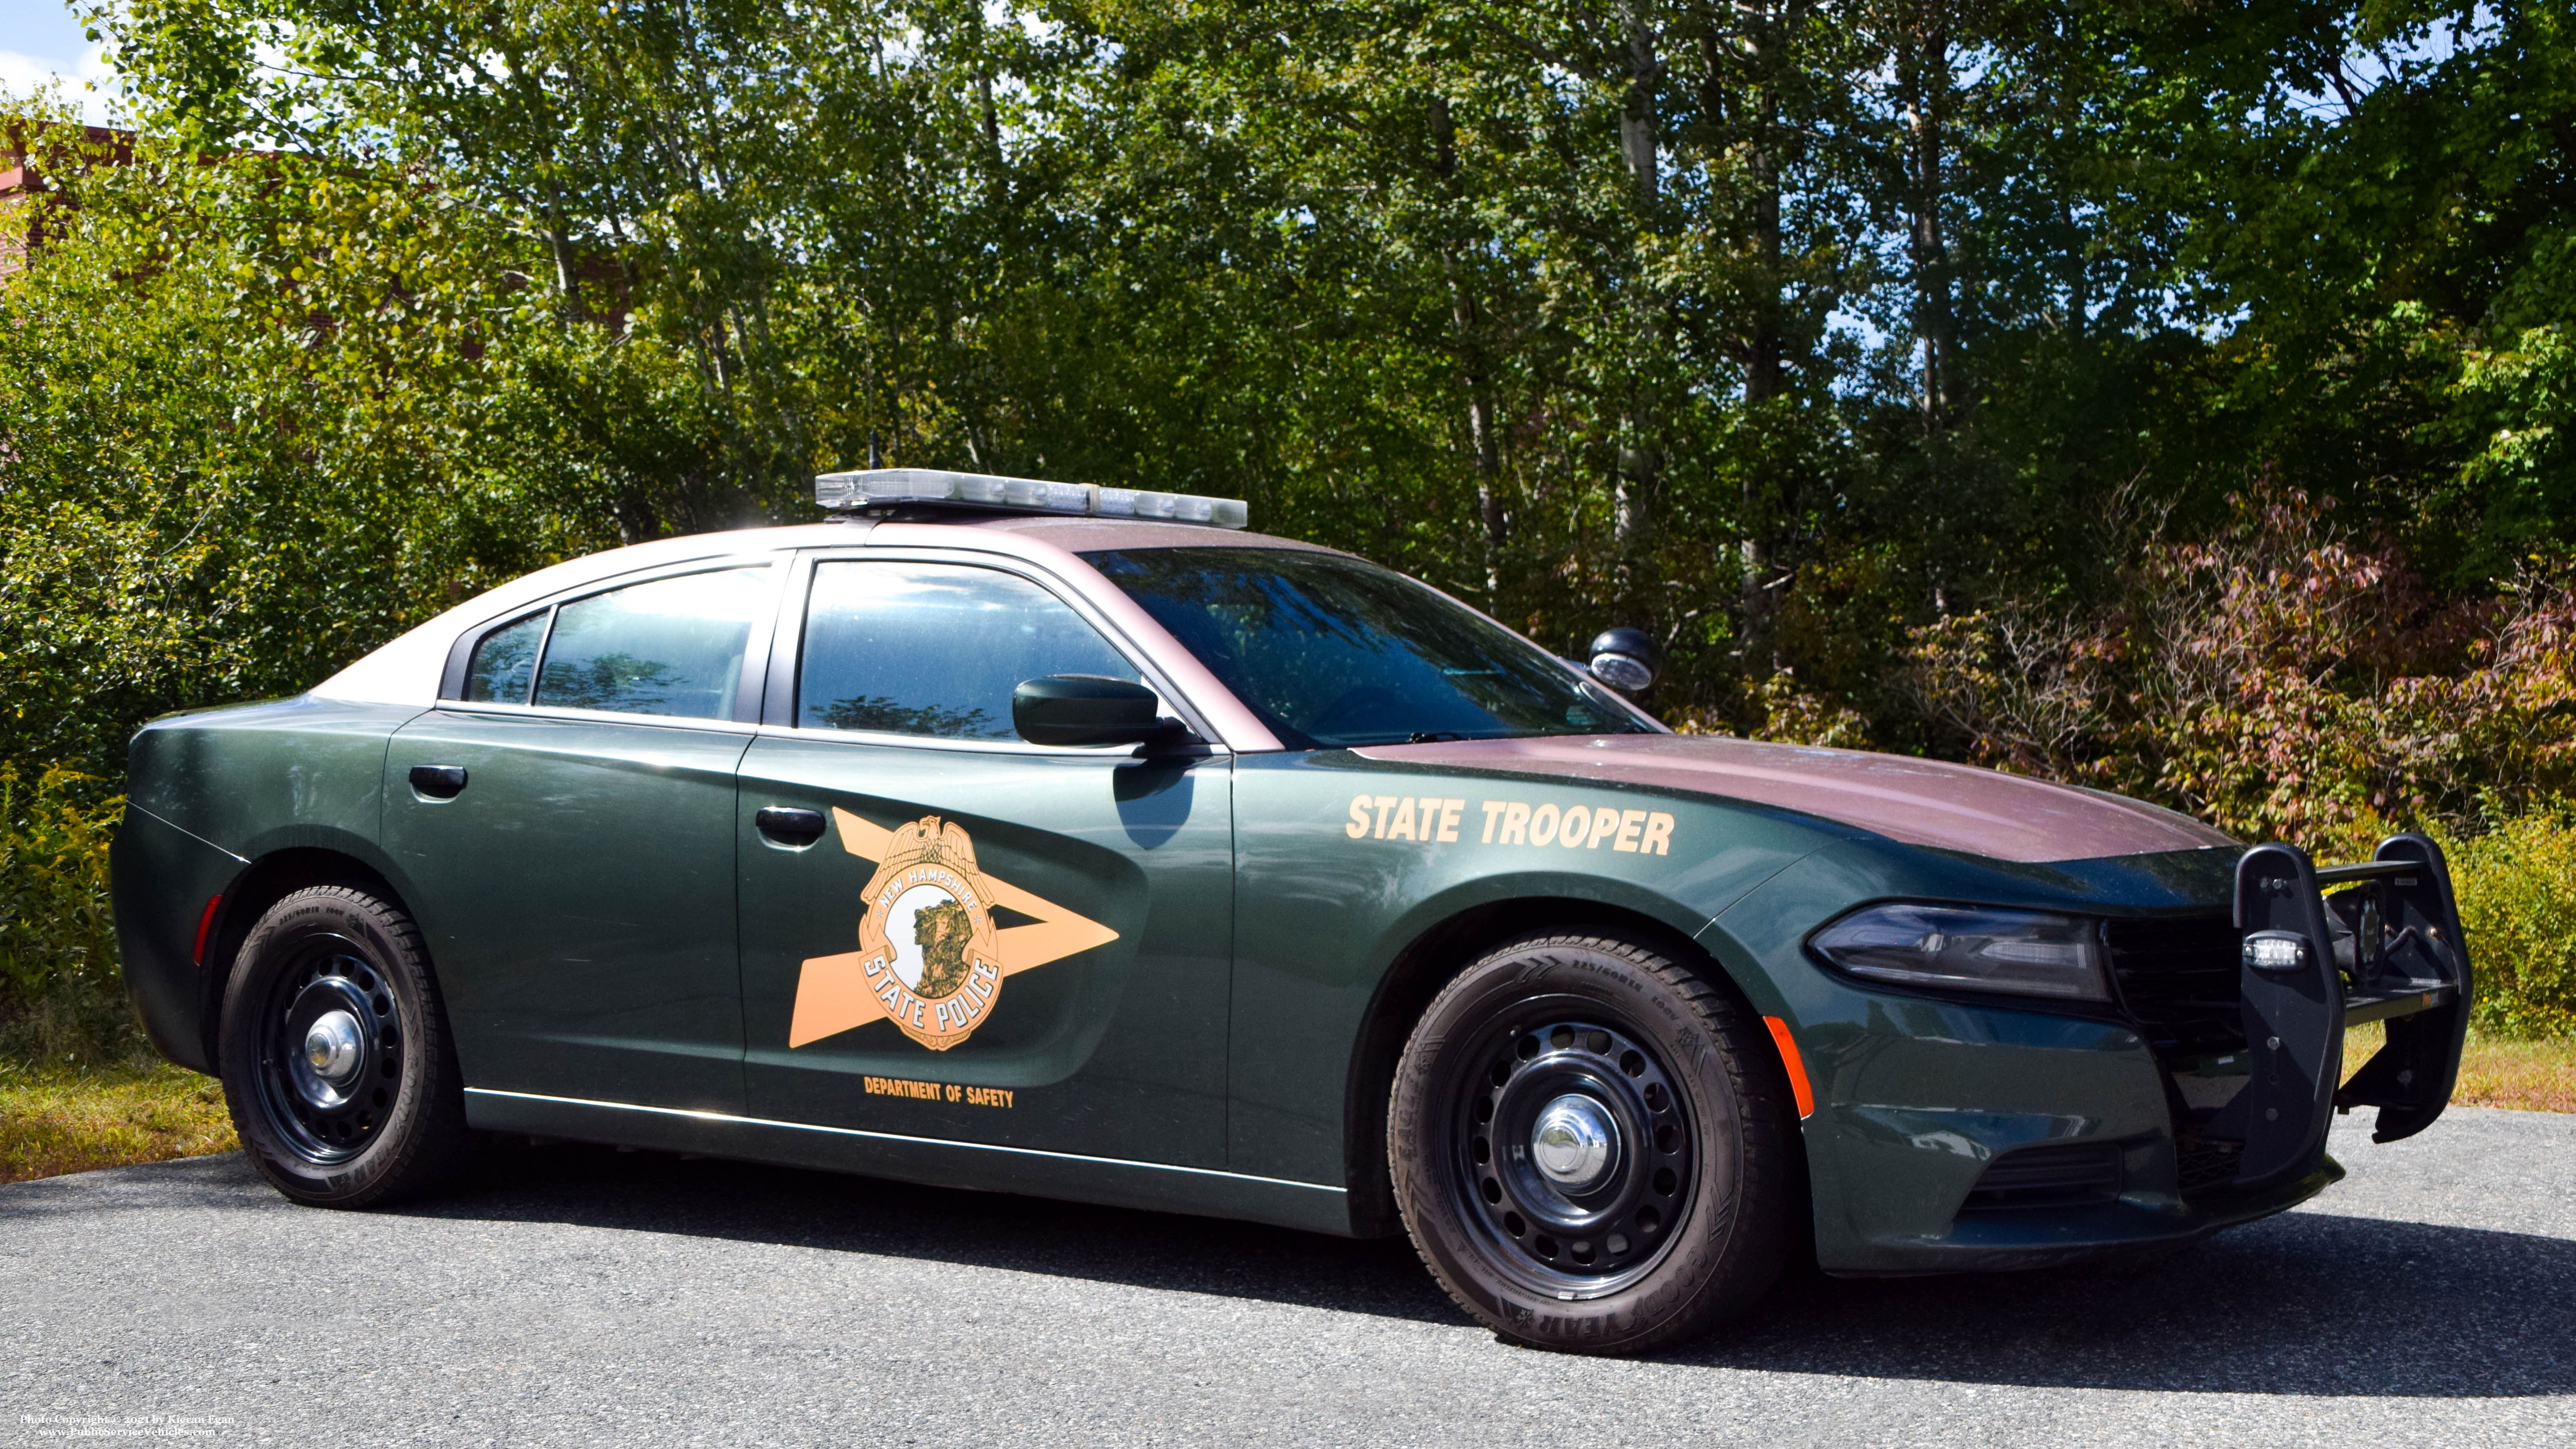 A photo  of New Hampshire State Police
            Cruiser 316, a 2015-2016 Dodge Charger             taken by Kieran Egan